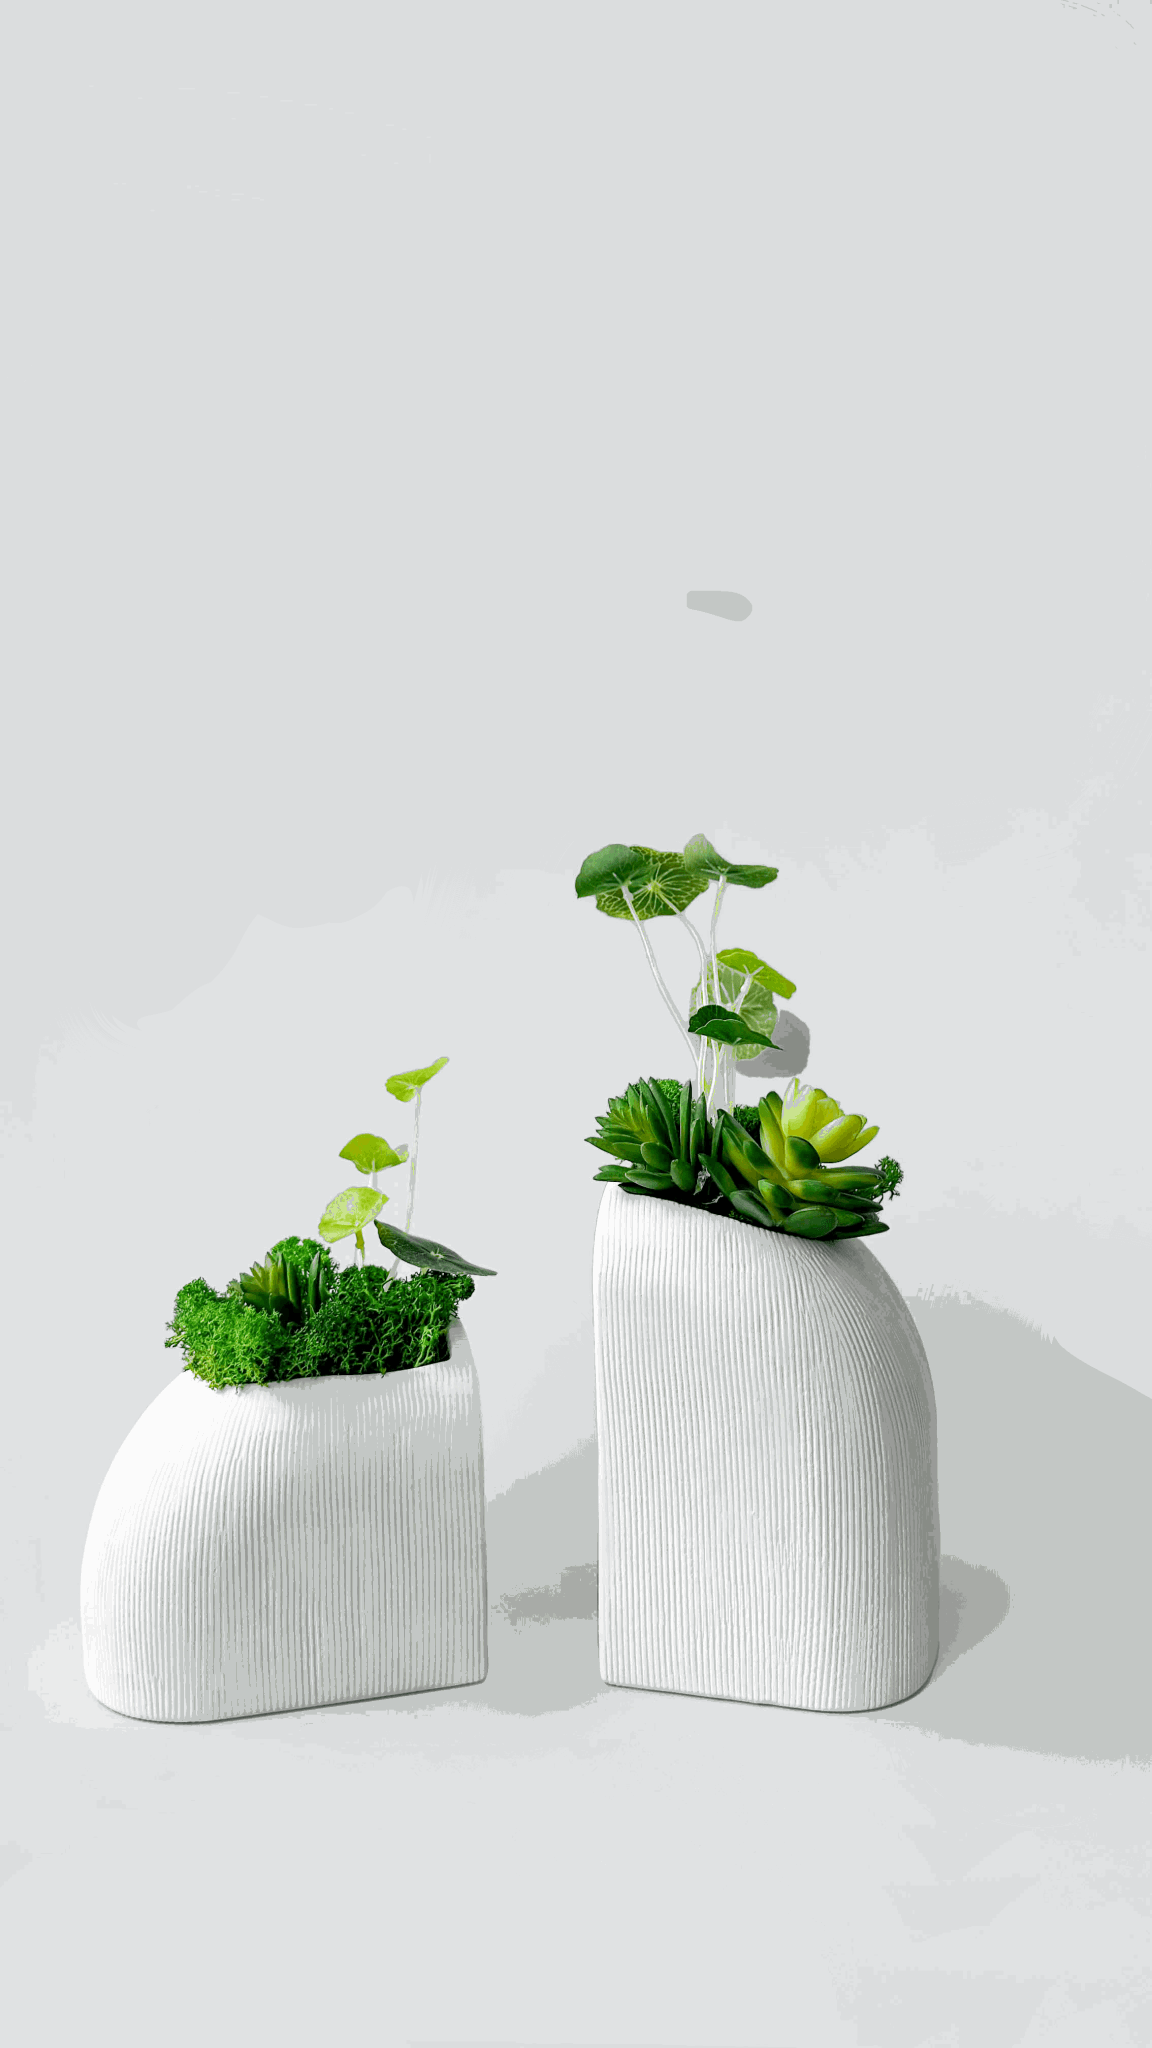 Elegance & Nature Tabletop Planter 2 Piece Set with Artificial Lotus &
Elevate your decor with our Elegance &amp; Nature Tabletop Planter Set. A serene marriage of artificial lotus leaves and preserved moss rests within two striking wh